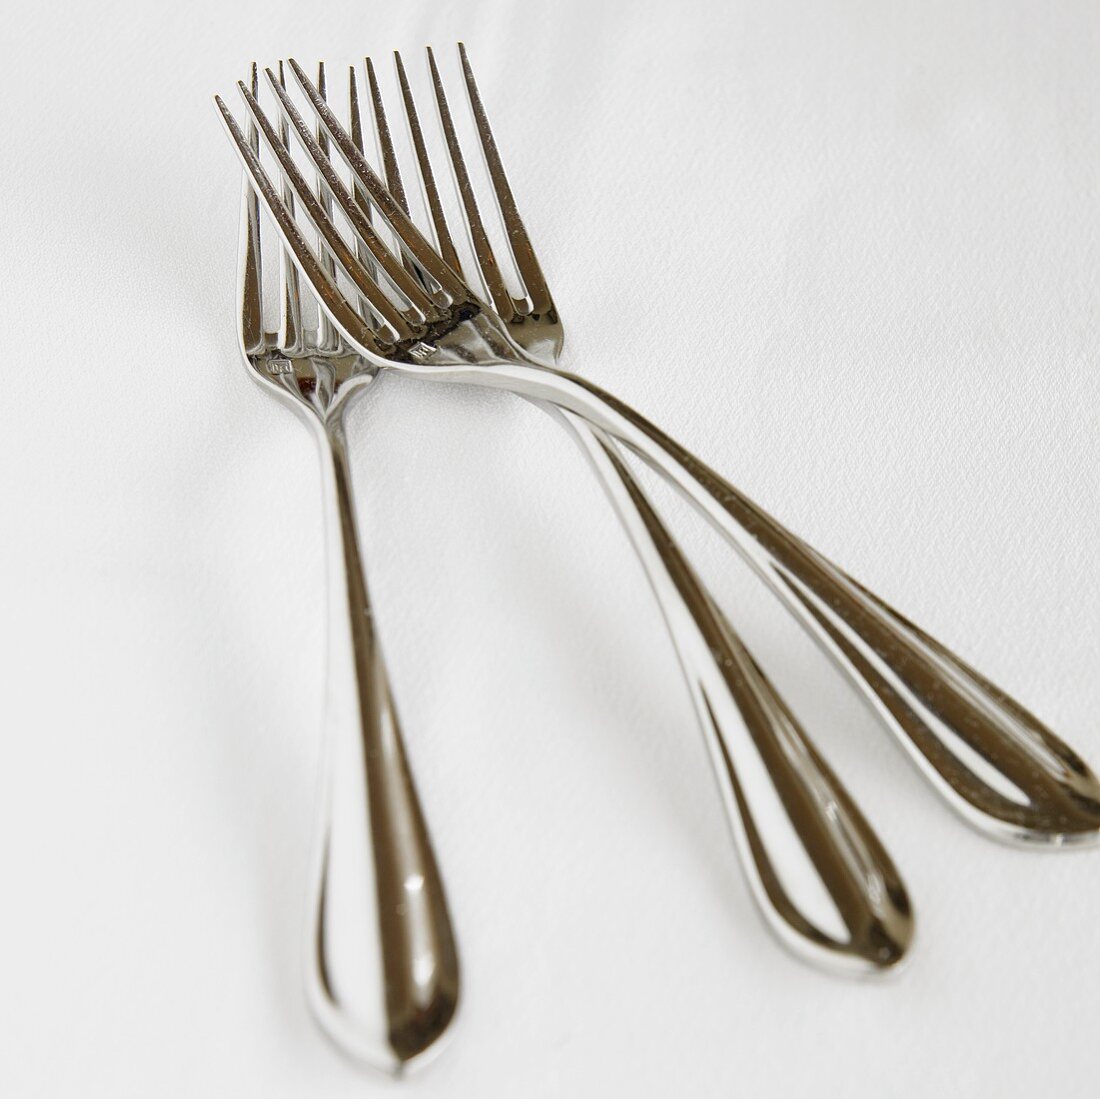 Three Forks on a White Background